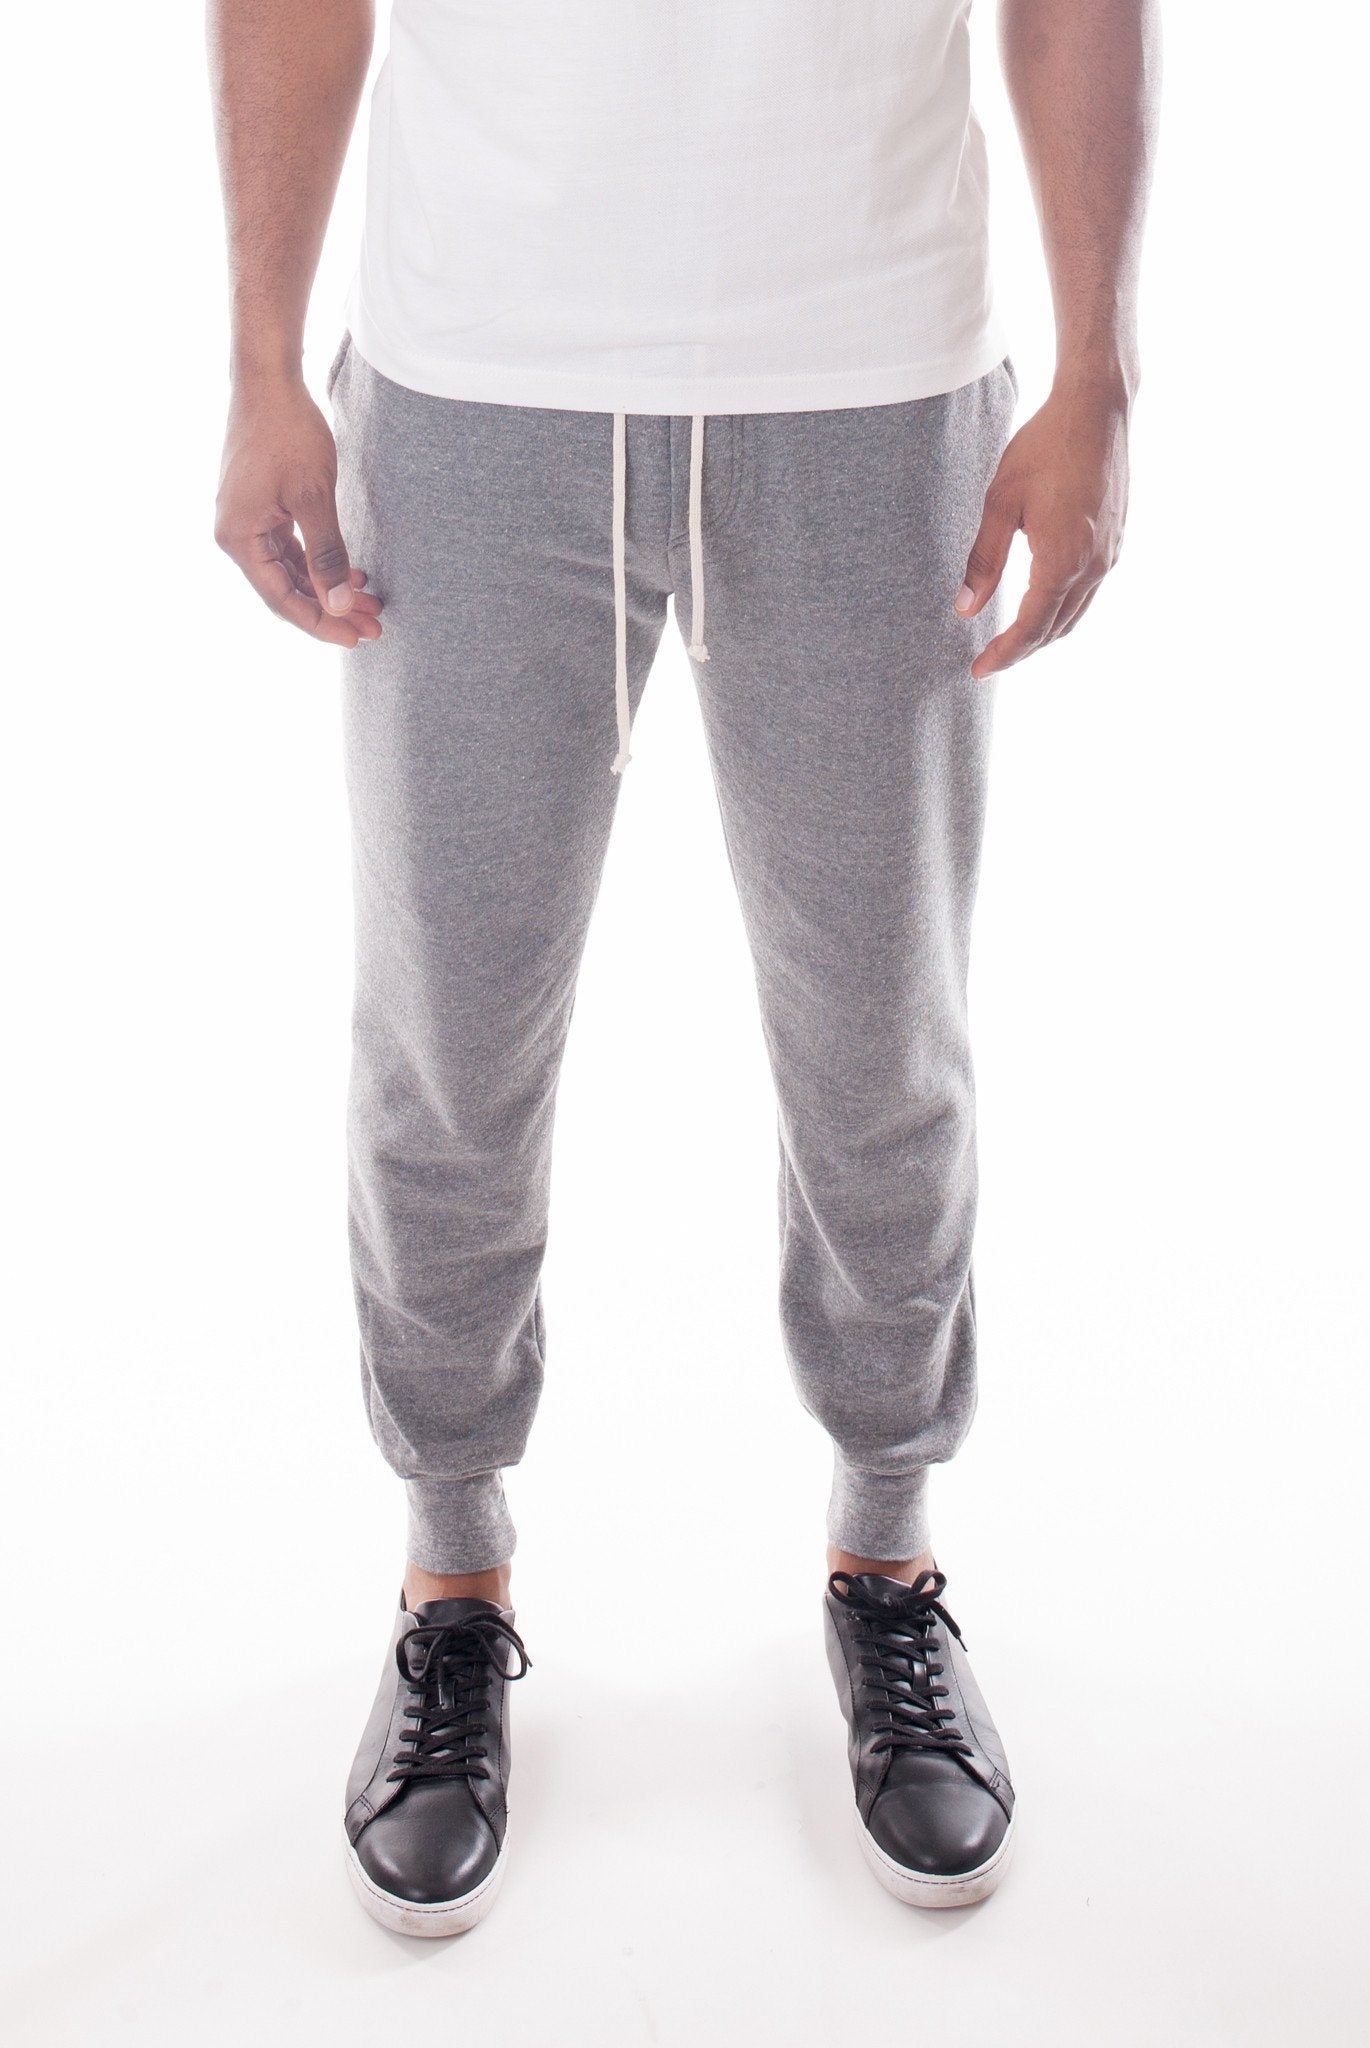 HEATHER GREY JOGGERS | Poor Little Rich Boy Clothing